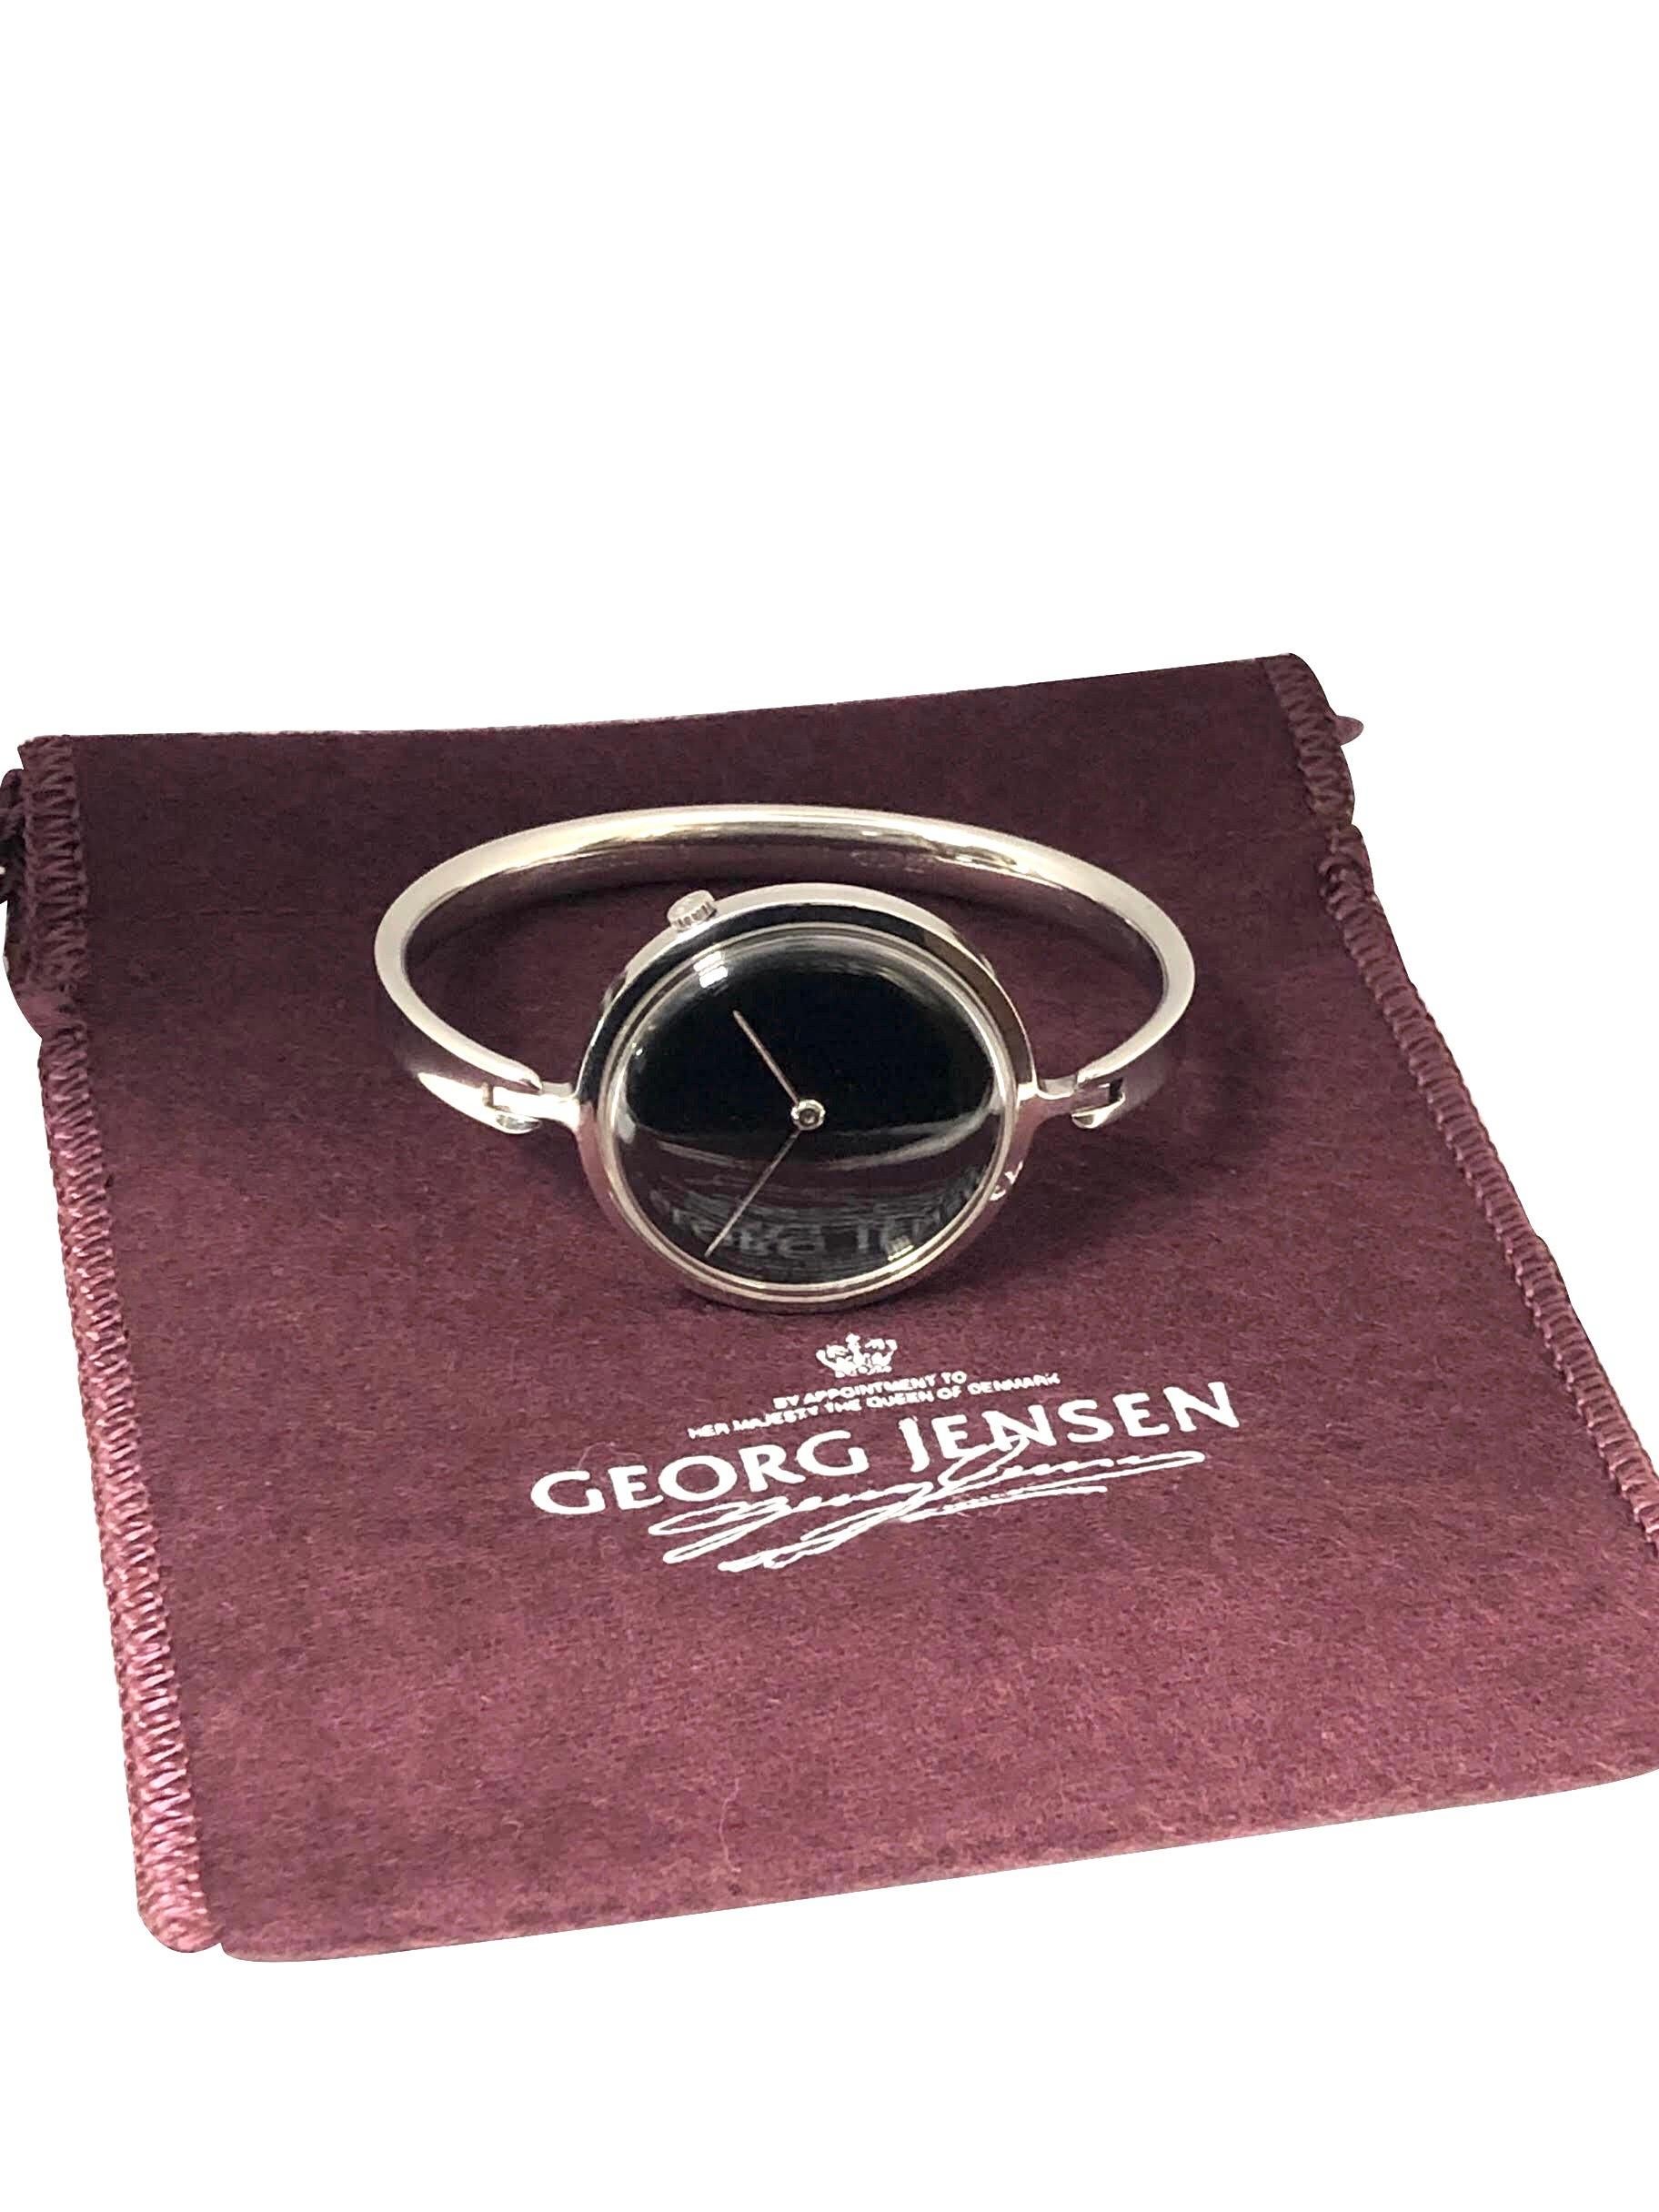 Circa 1990s Georg Jensen Vivianna Bangle Watch By Torun. Measuring 1 1/4 inch Diameter with the watch attached to a 3/16 inch wide bangle bracelet with a 6 1/2 inch inside measurement. Quartz Movement, Black mirrored Dial. Comes in a Georg Jensen